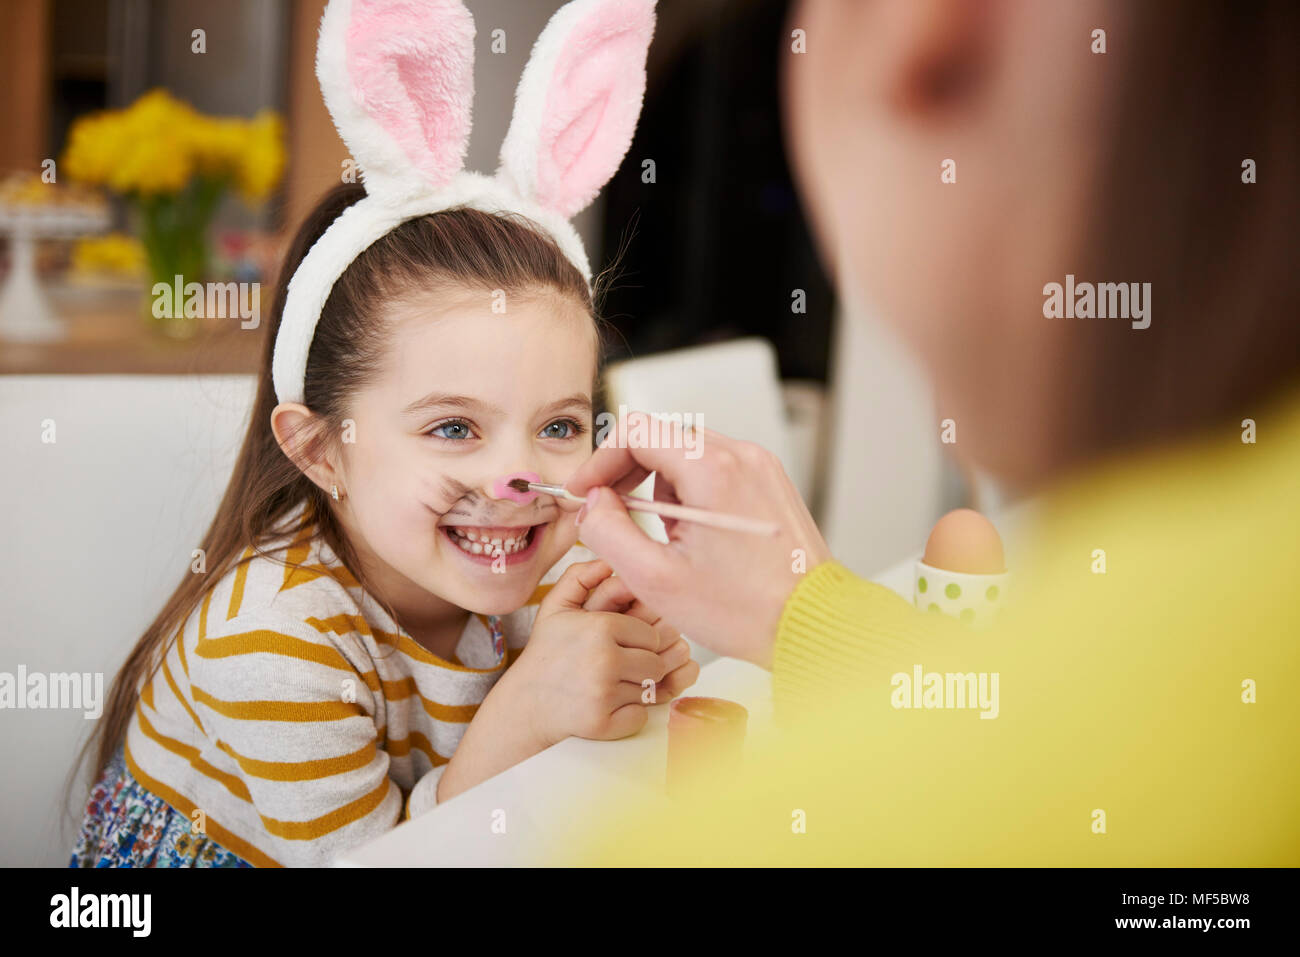 Mother painting daughter's face wearing bunny ears Stock Photo